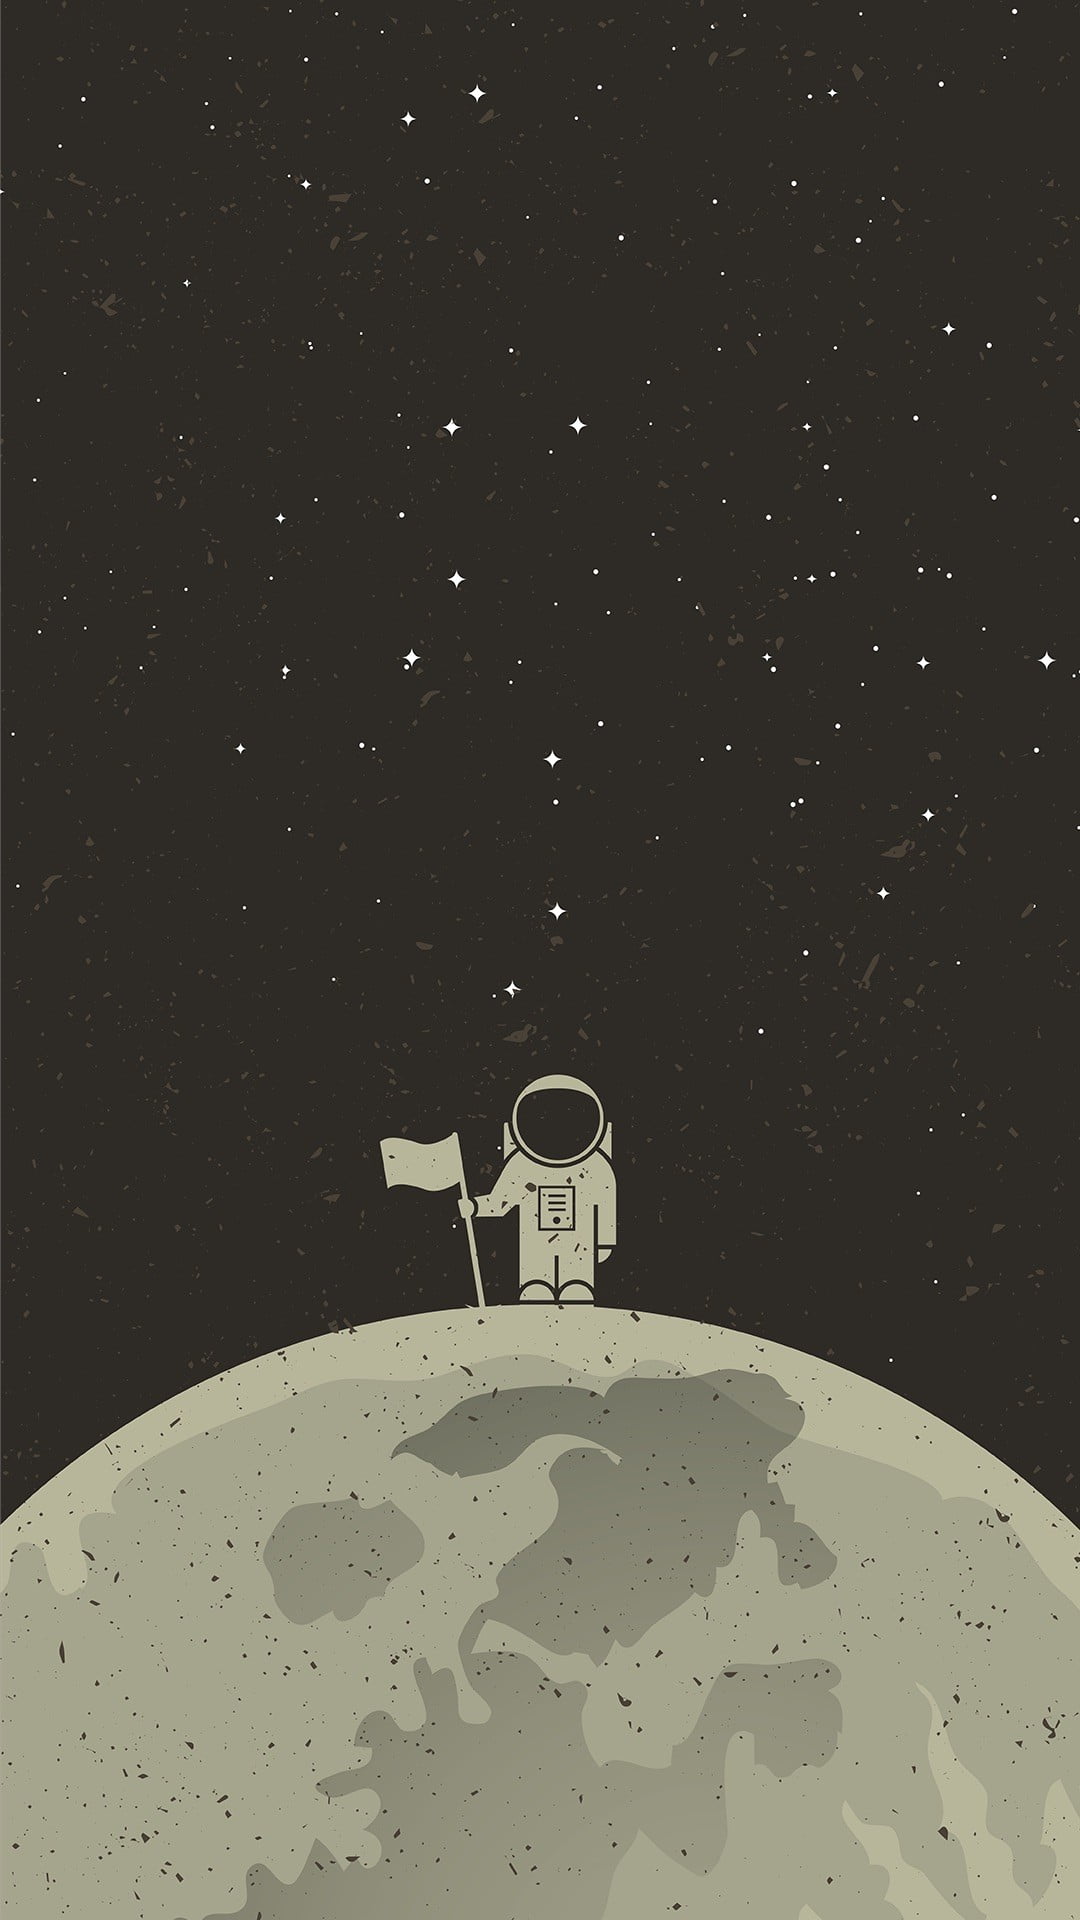 astronaut illustration, person in space suit standing holding flag on moon illustration